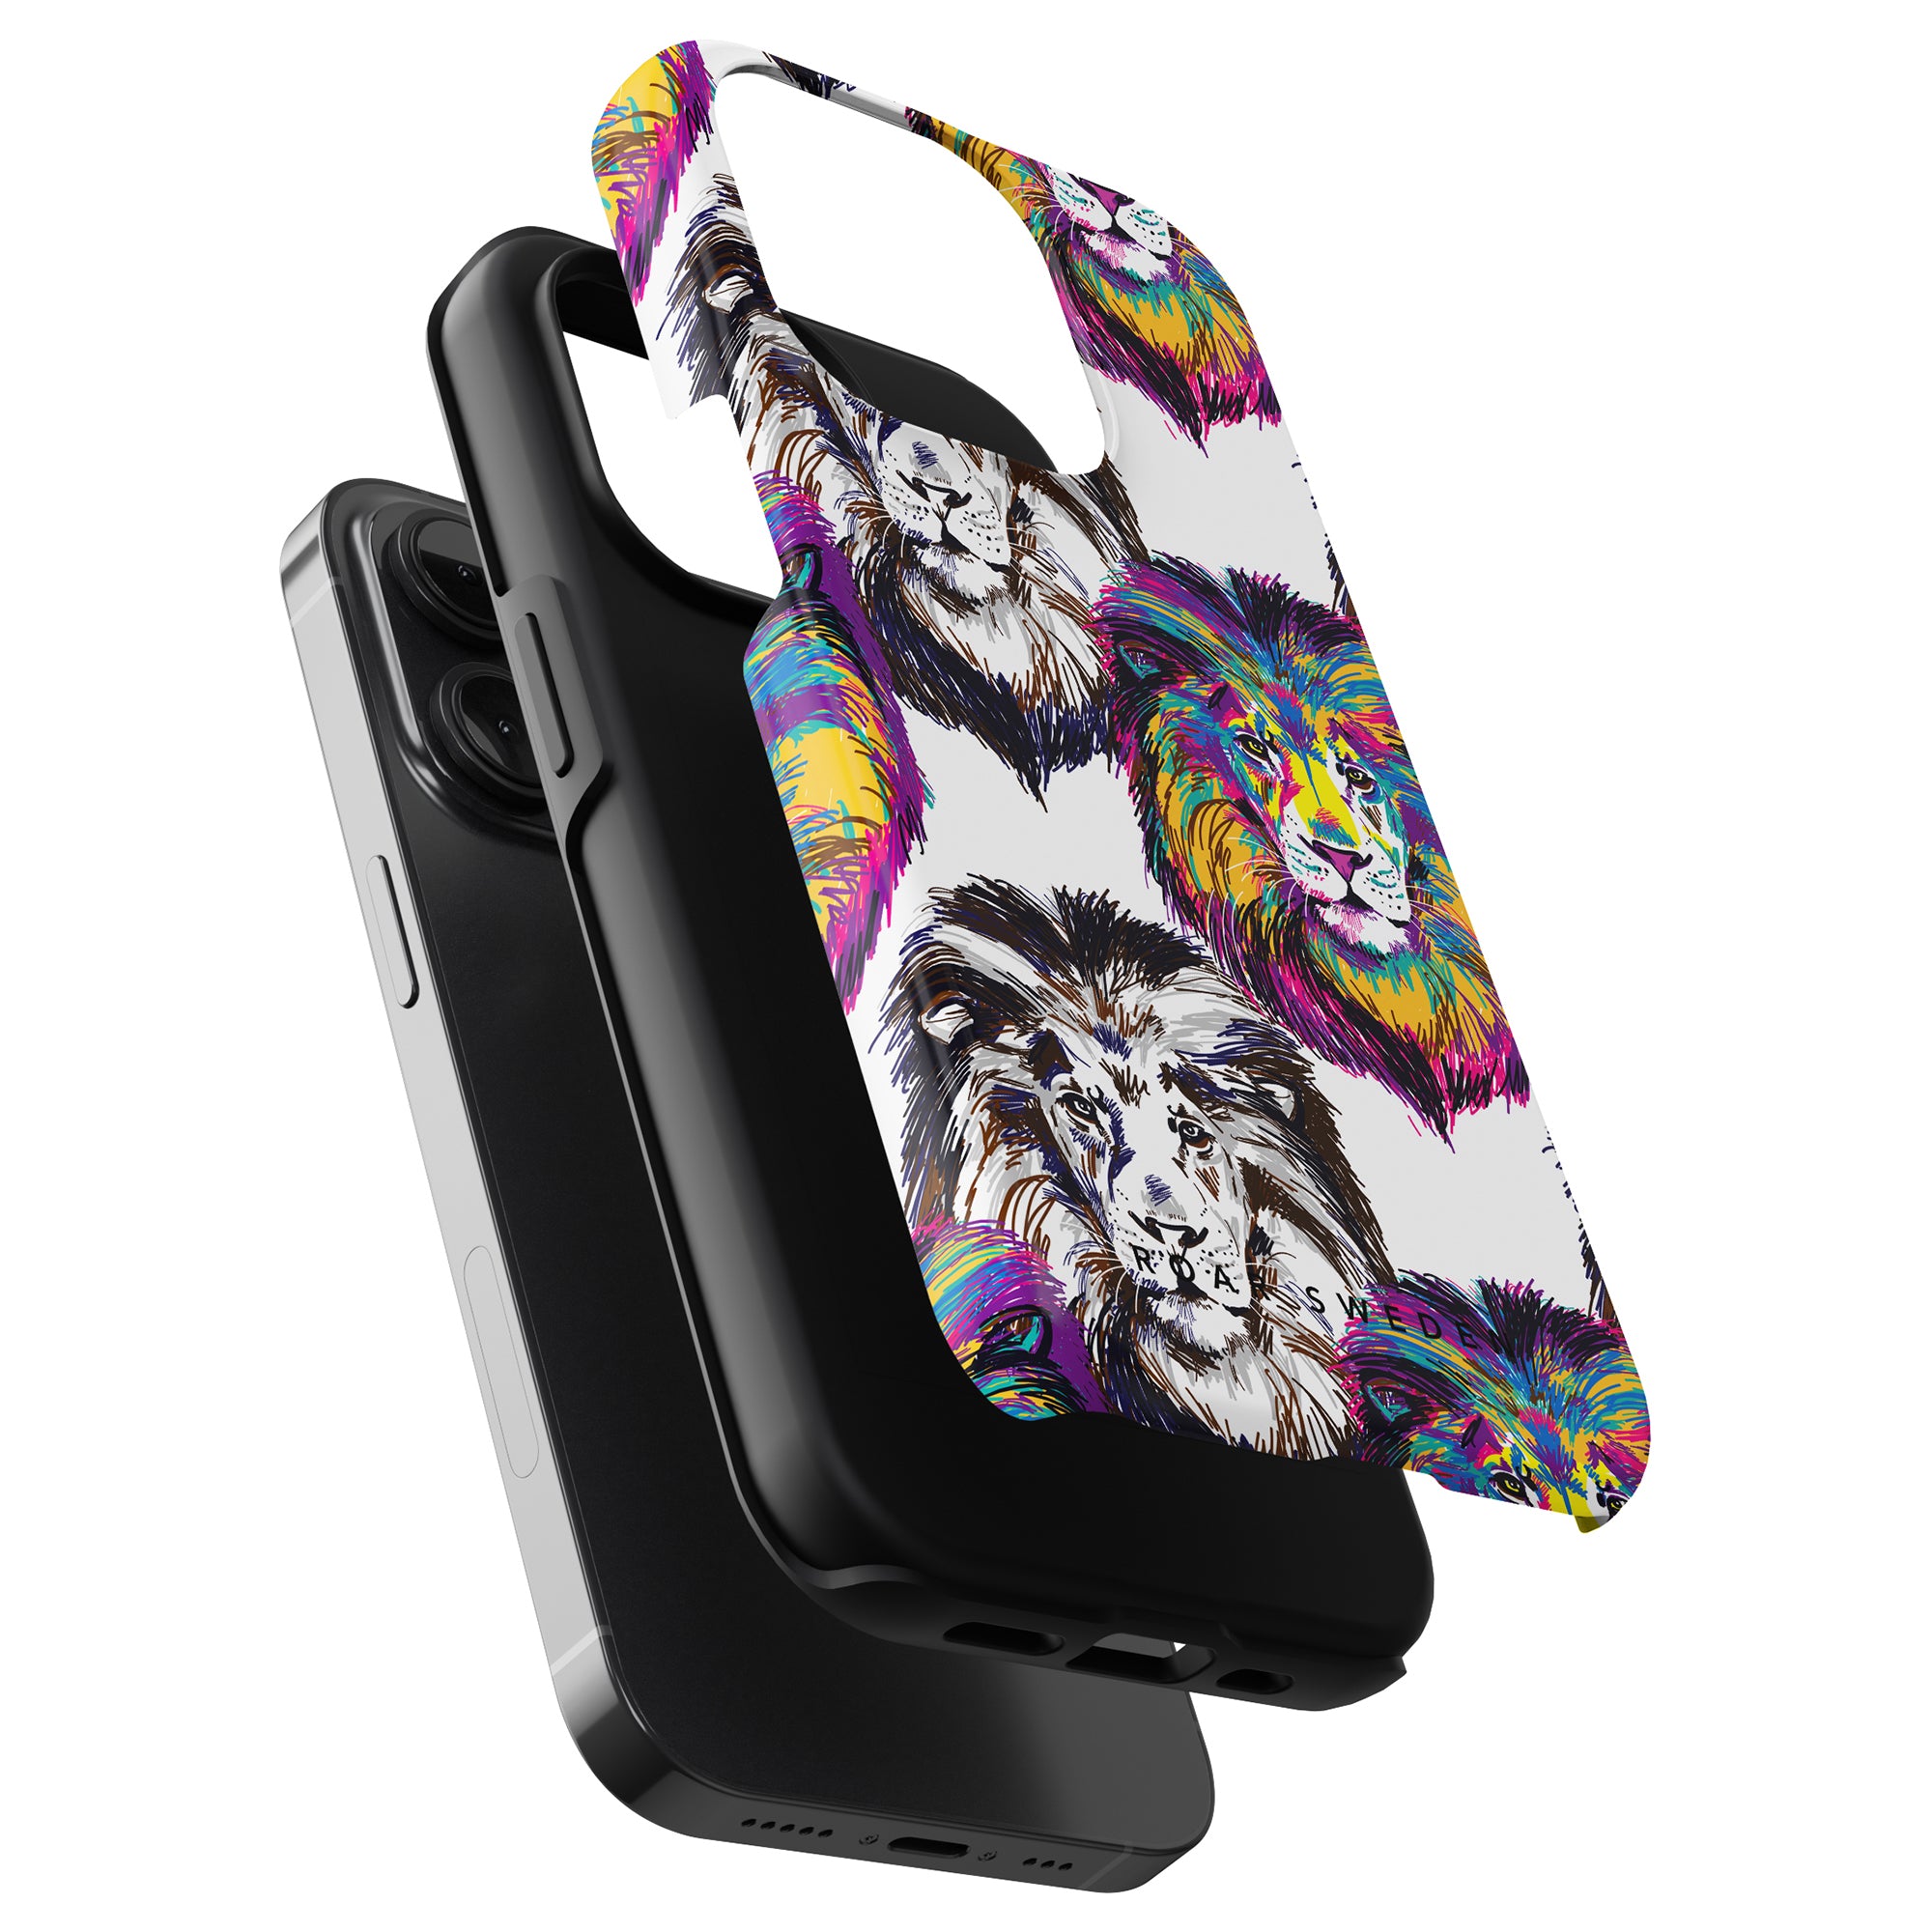 A smartphone in a Simba - Tough Case next to a colorful strap featuring vibrant illustrations of animal faces from the Safari kollektion.